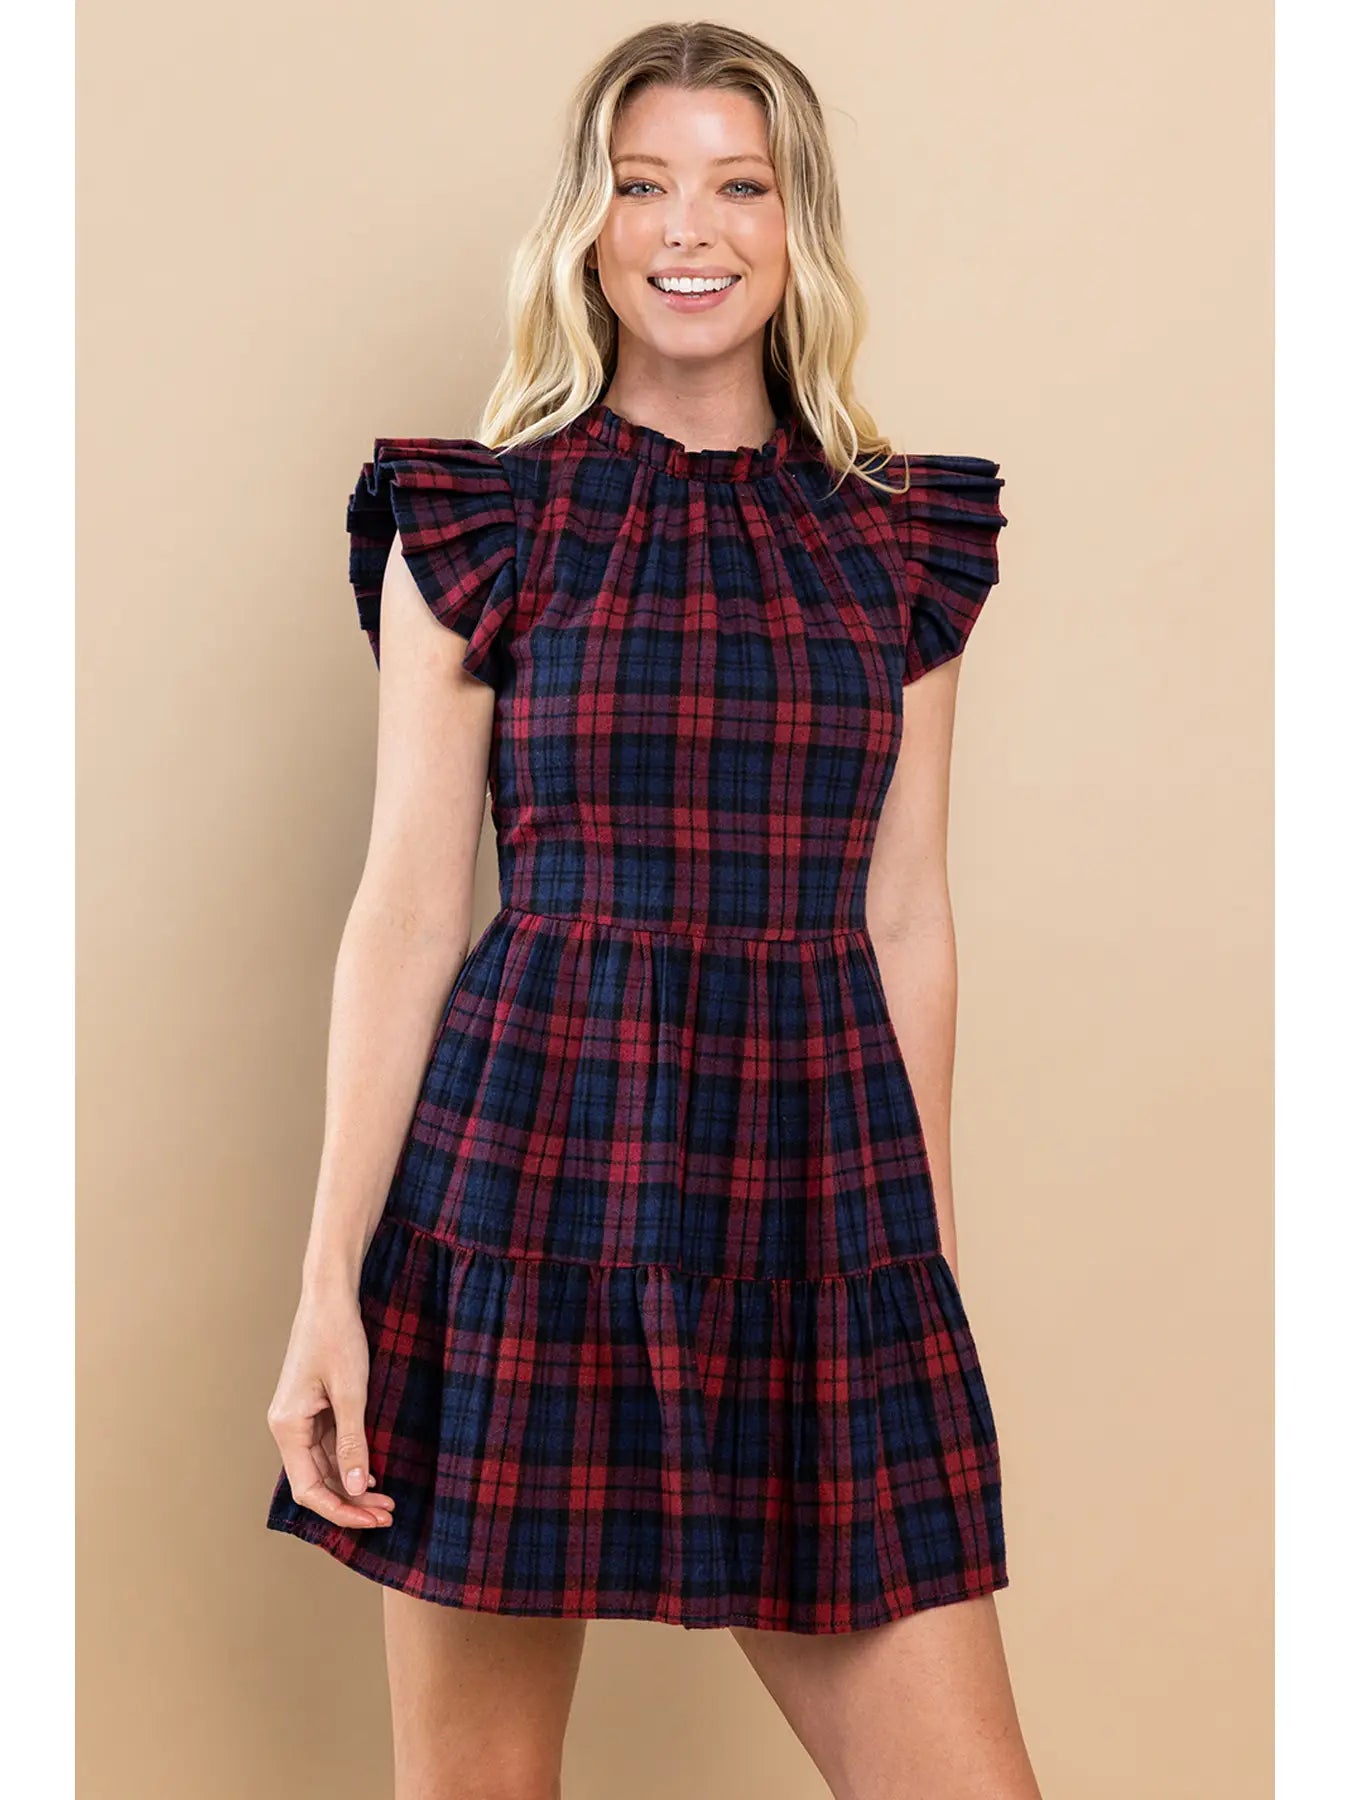 Let's Holiday Plaid Dress